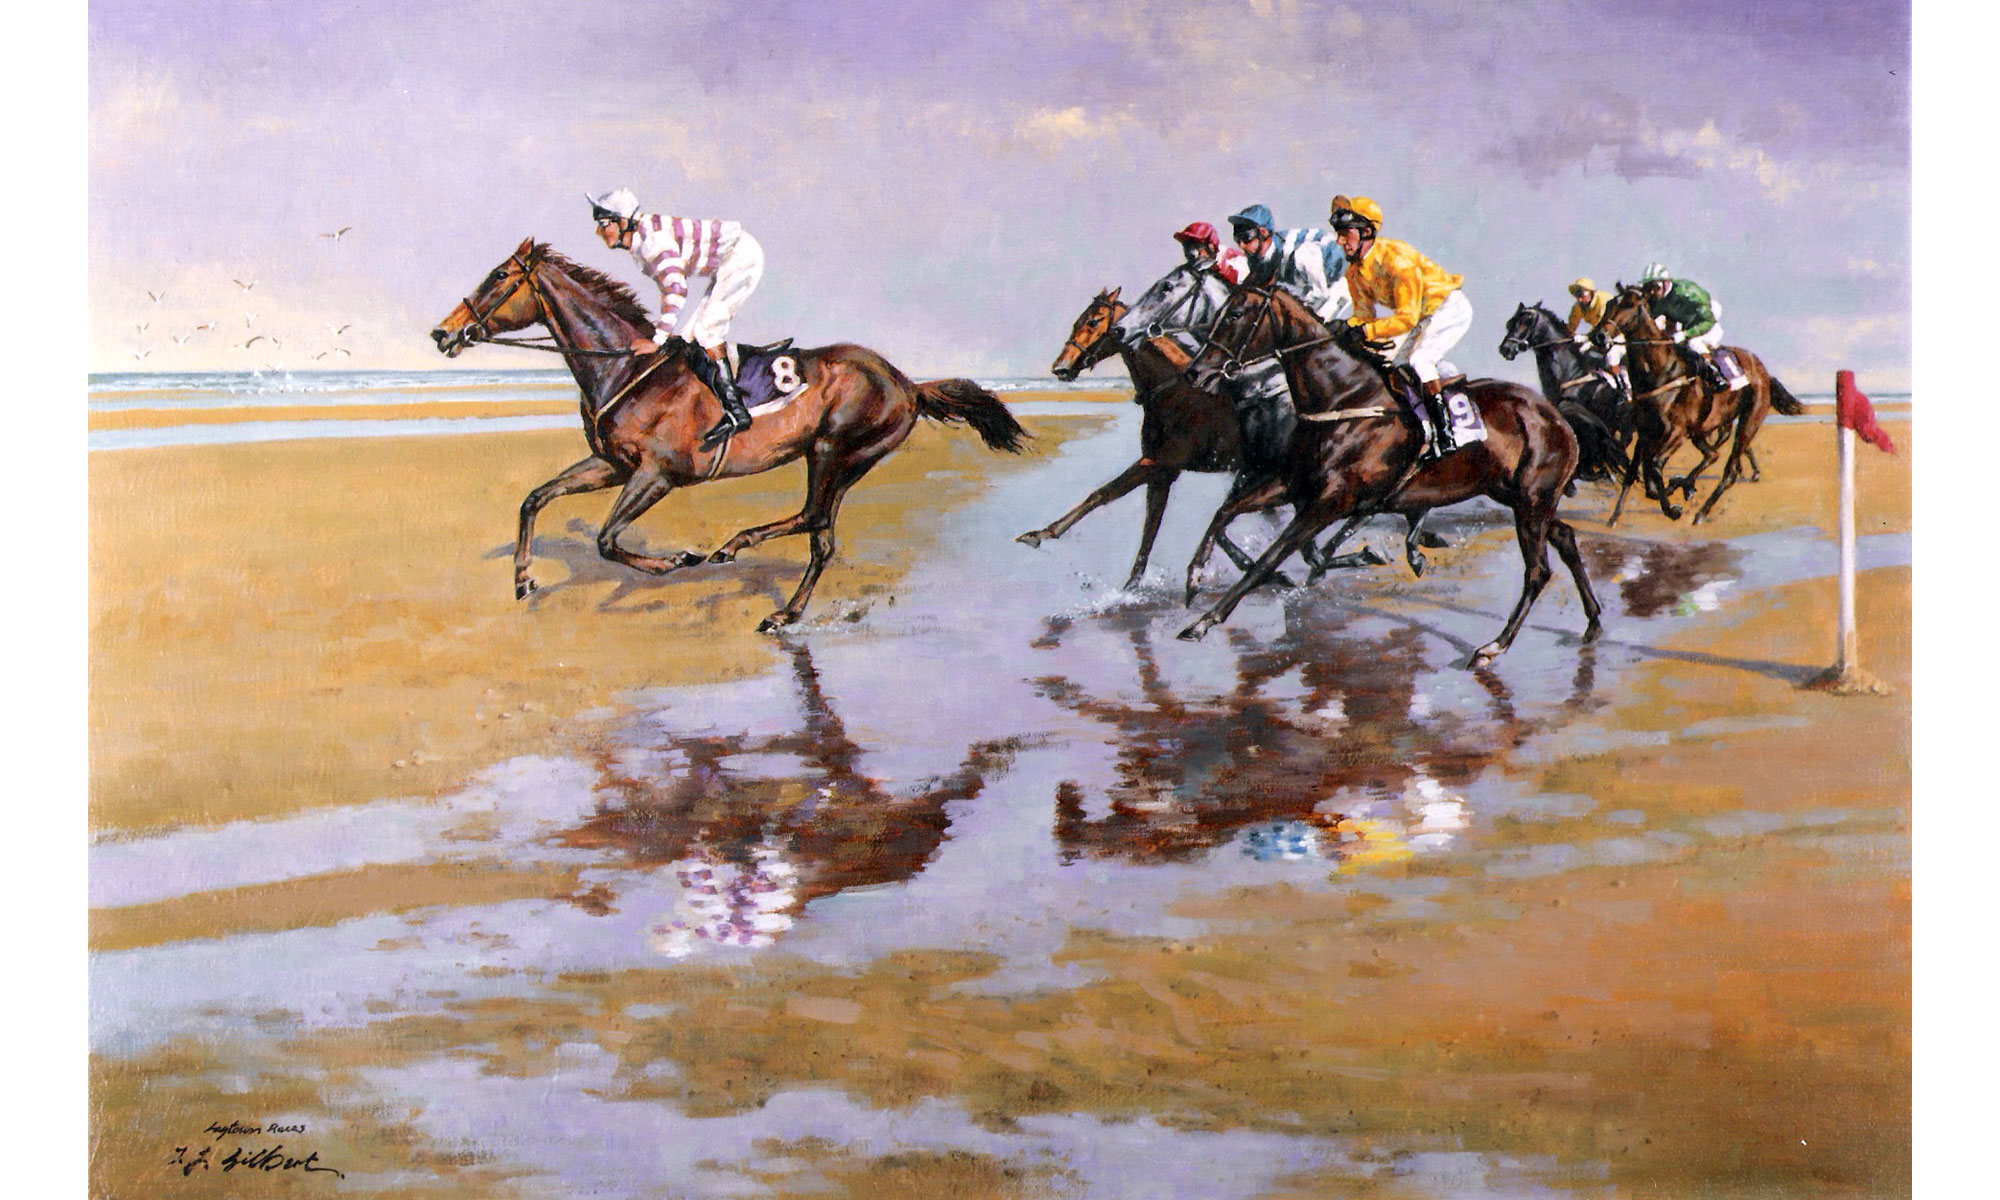 Laytown Horse Races Painting by Terence J Gilbert Oil on Board